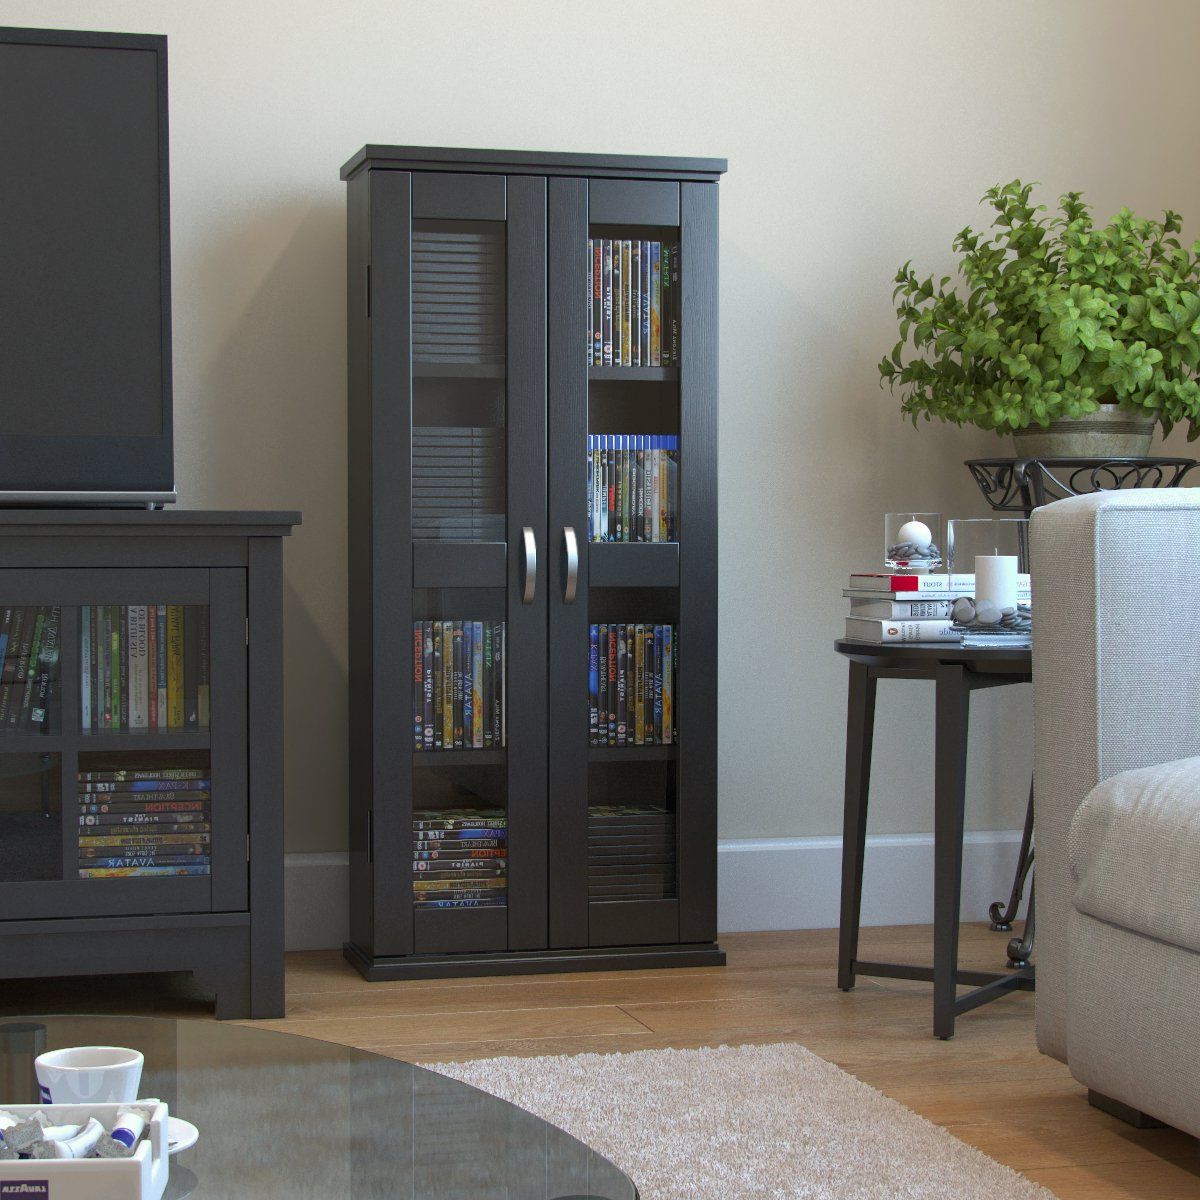 Kirkwell 41 Inch Wood Dvd Media Storage Tower In Black In Alden Design Wooden Tv Stands With Storage Cabinet Espresso (Gallery 13 of 20)